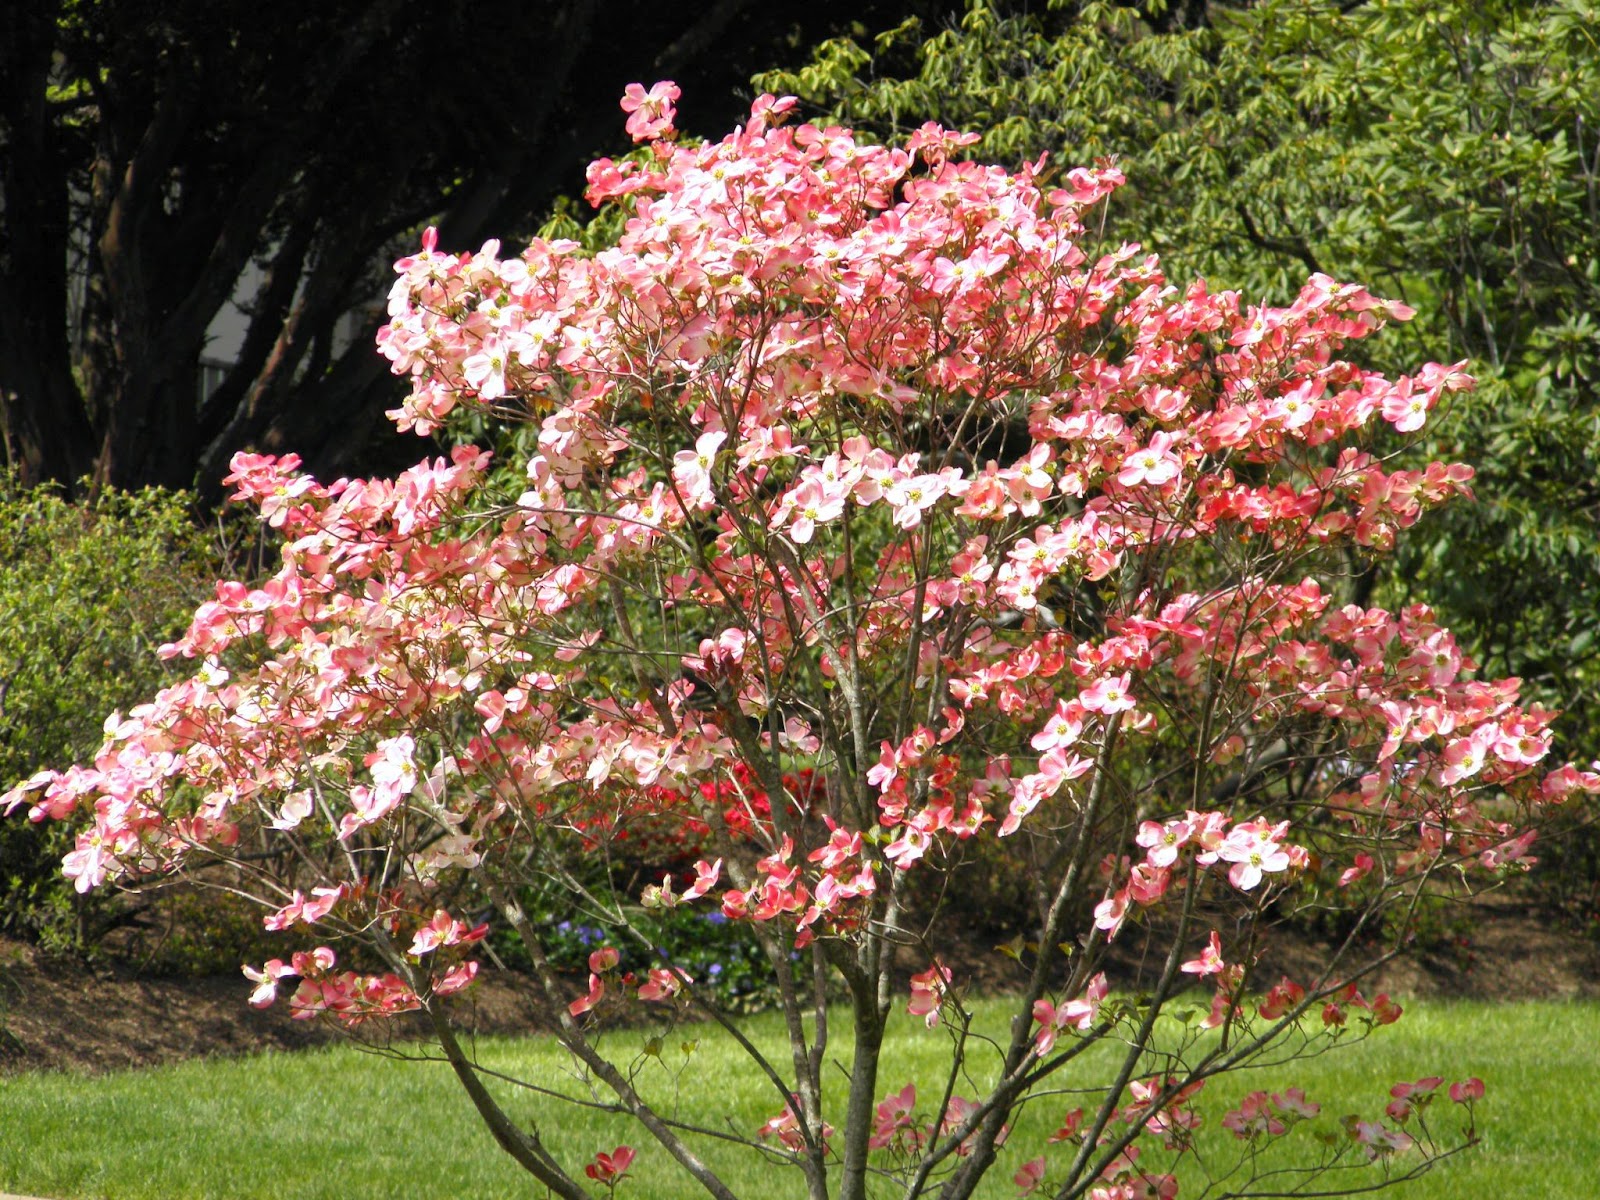 Good Things by David: Blooming Dogwood Trees